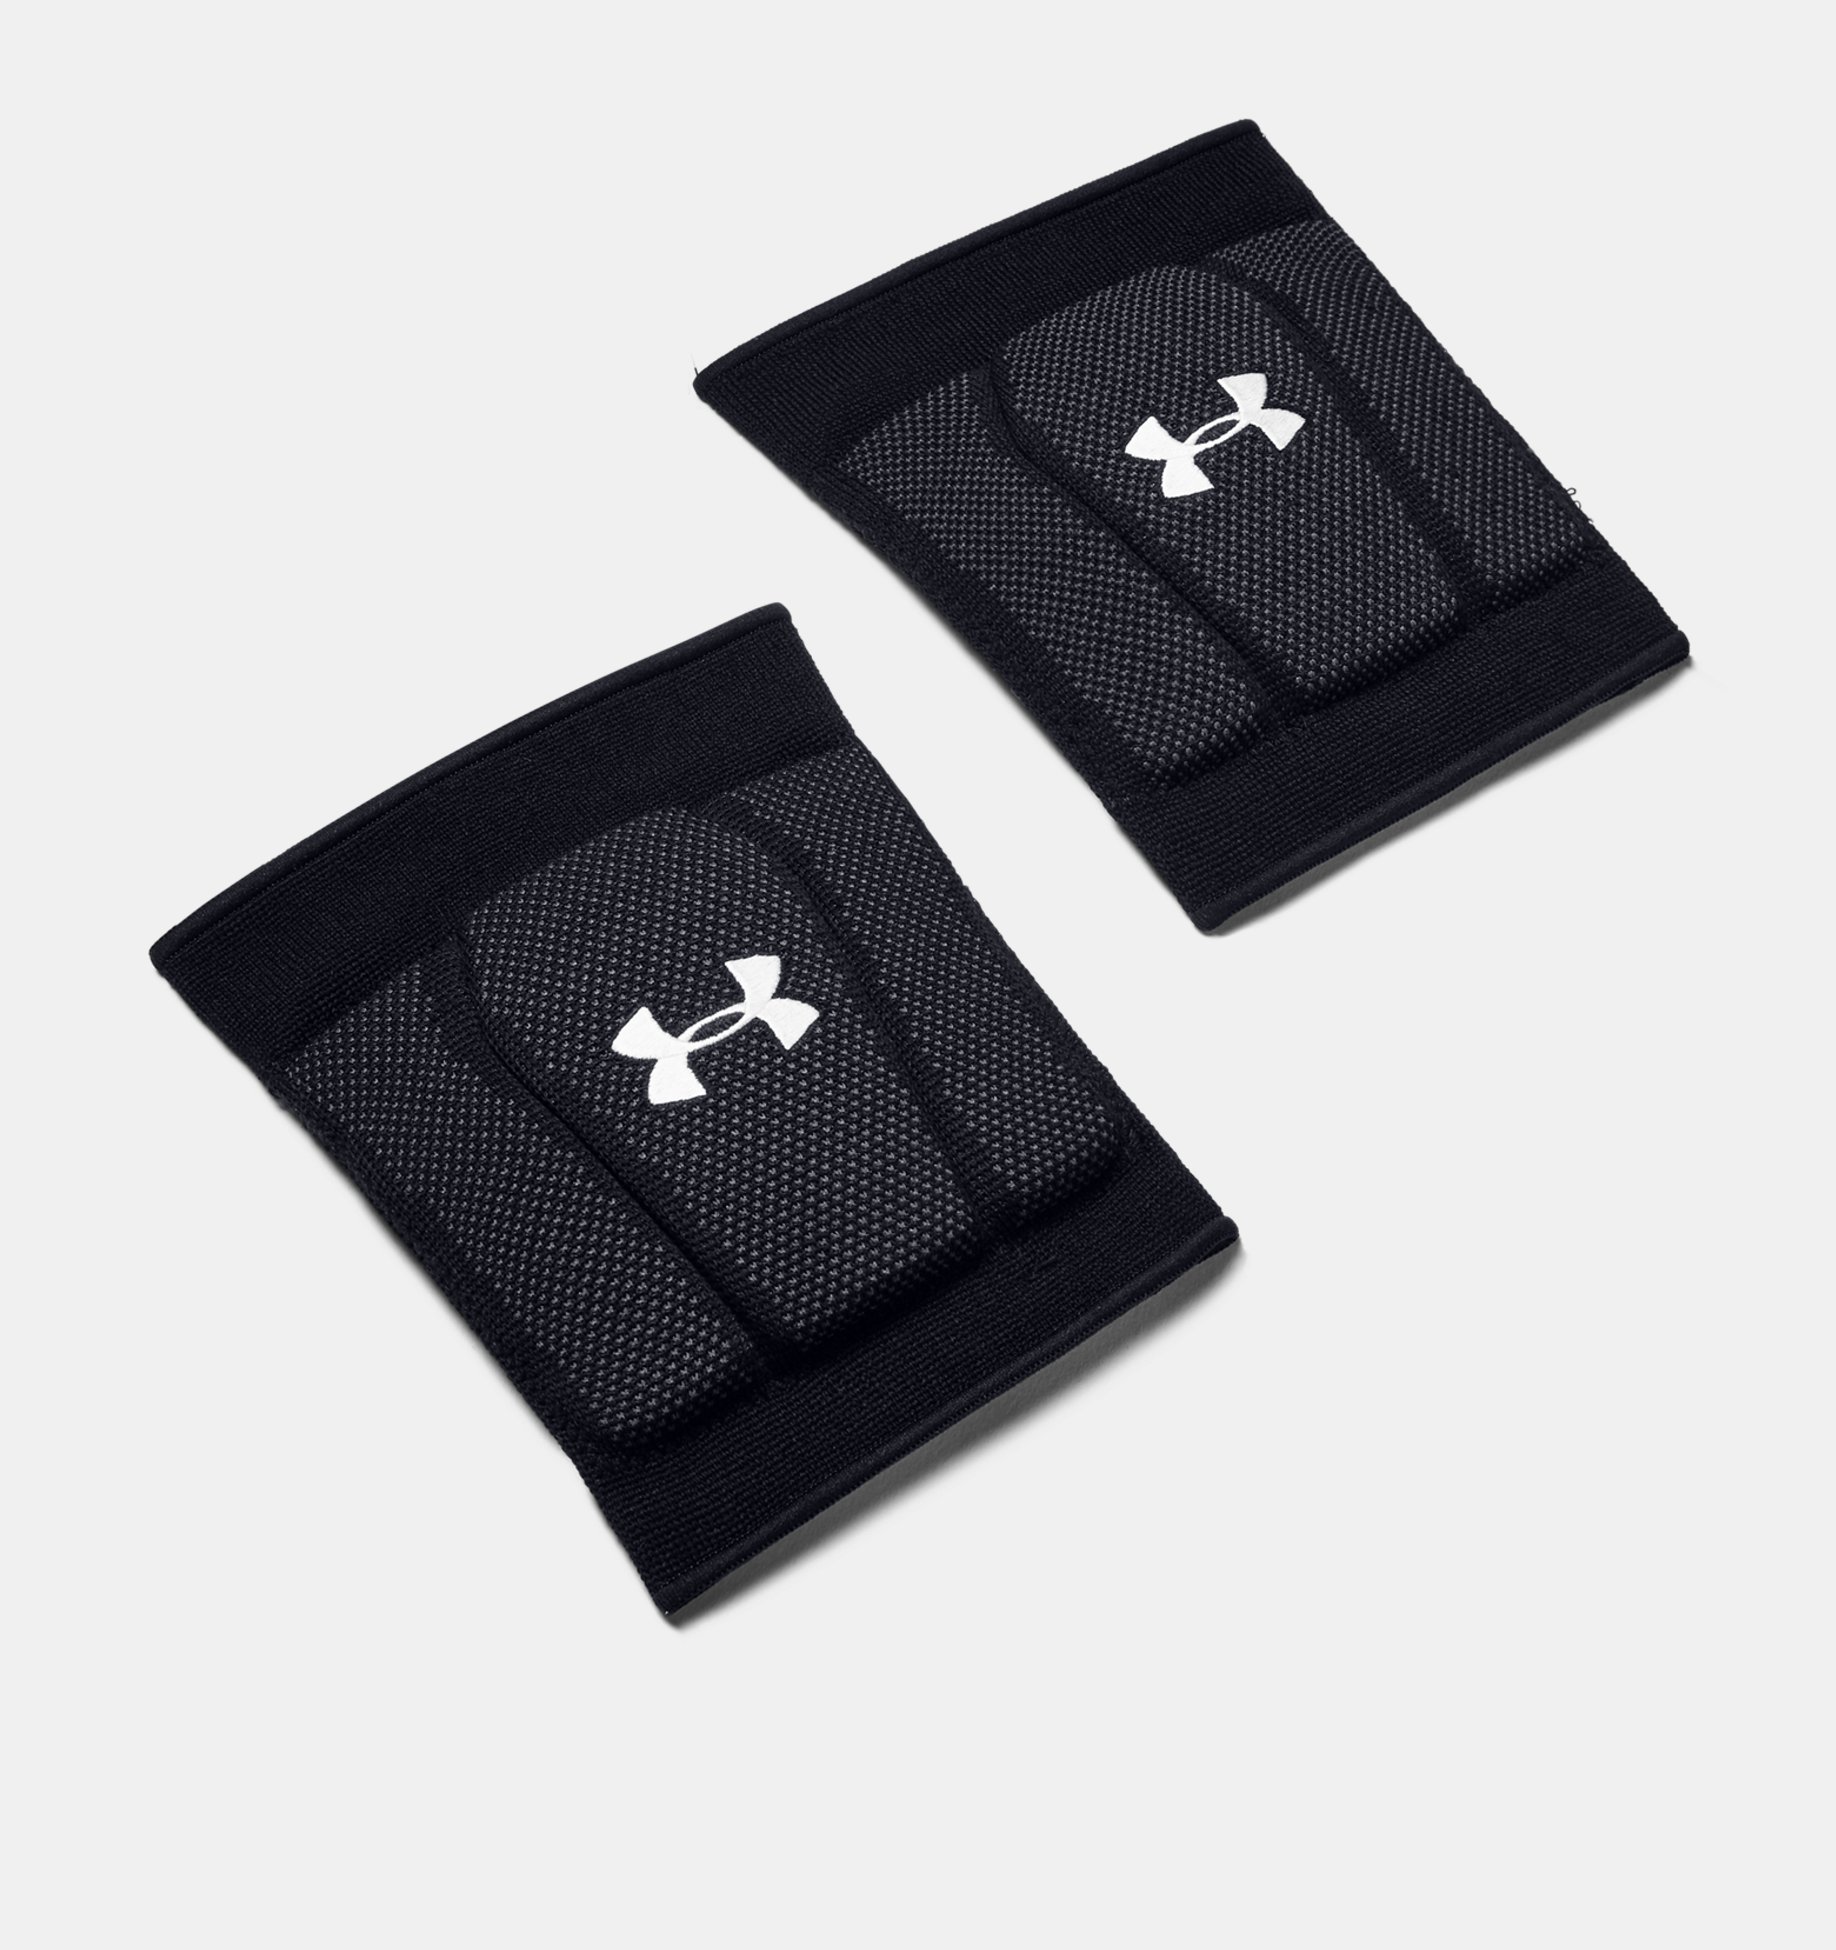 NEW Black FREE SHIPPING Under Armour 2.0 Volleyball Knee Pads Pair